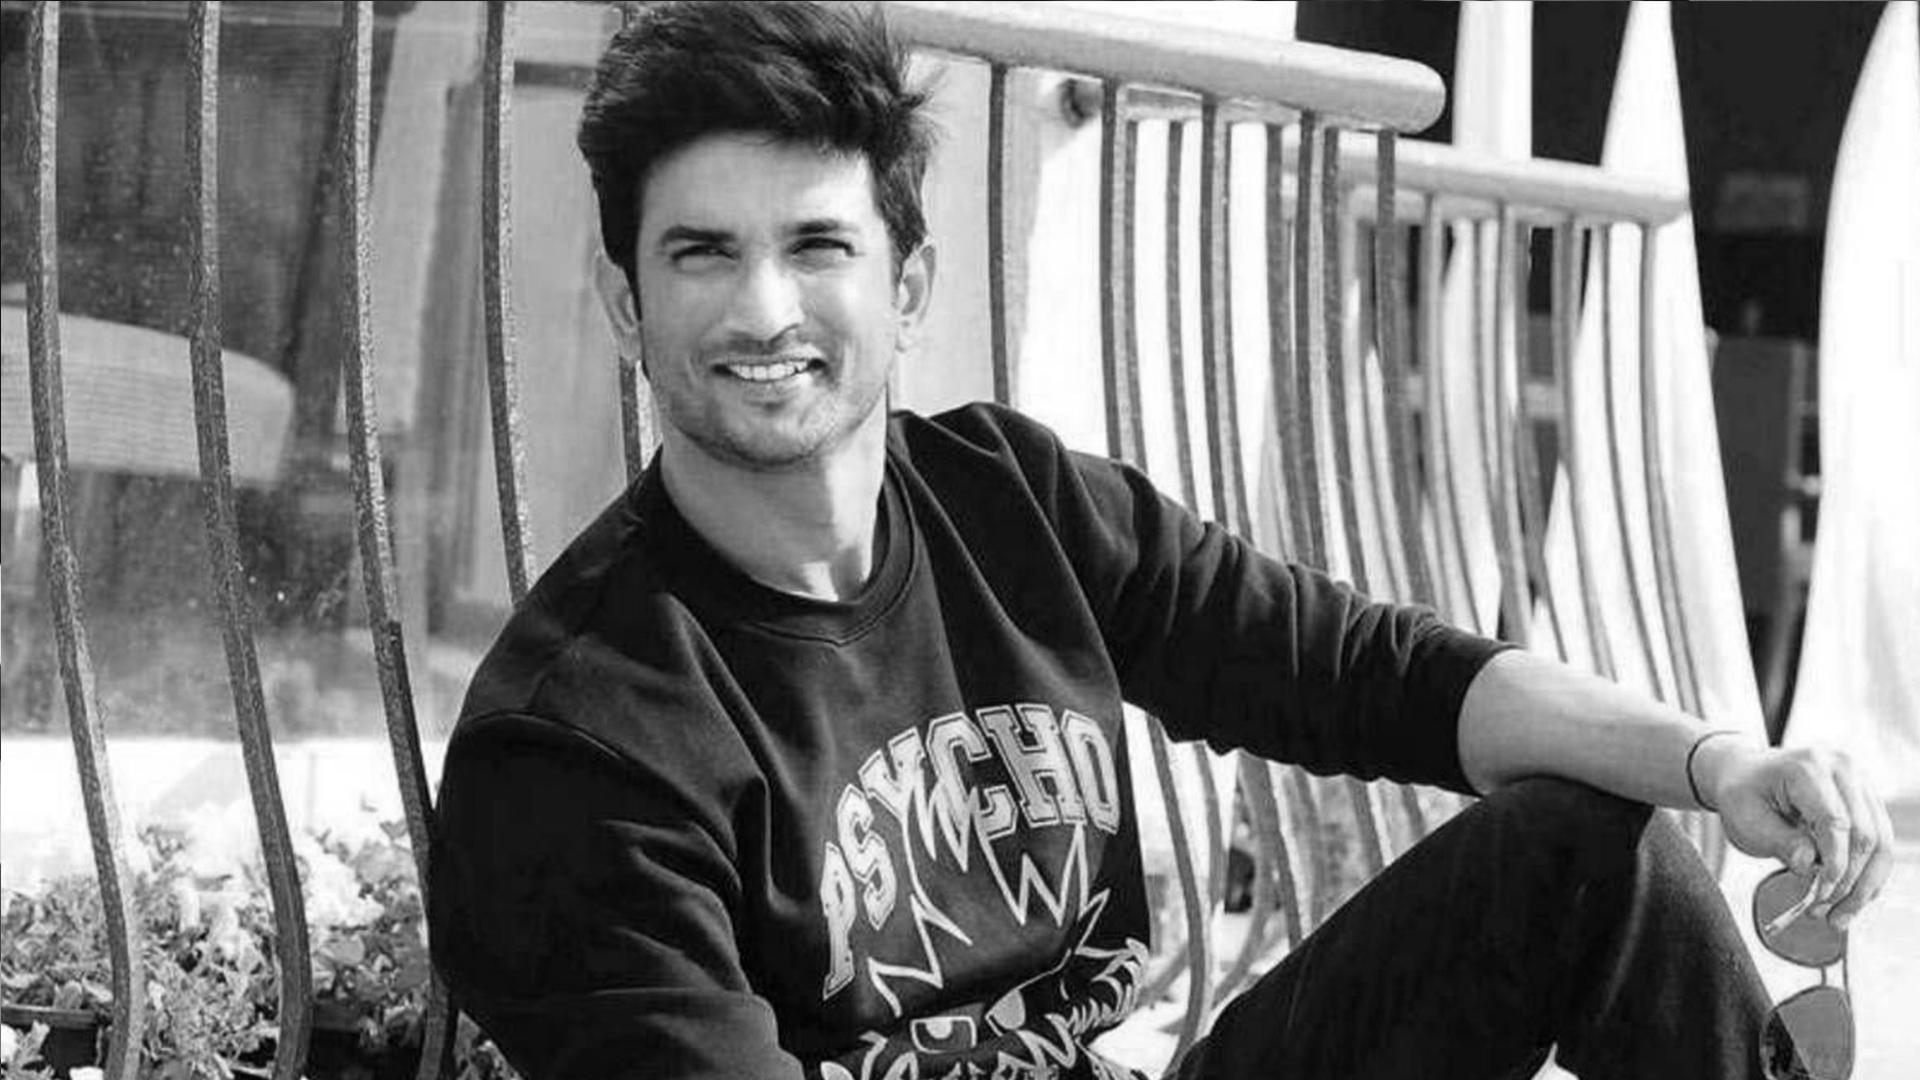 Cloth used by Bollywood Actor Sushant to hang himself to be tested